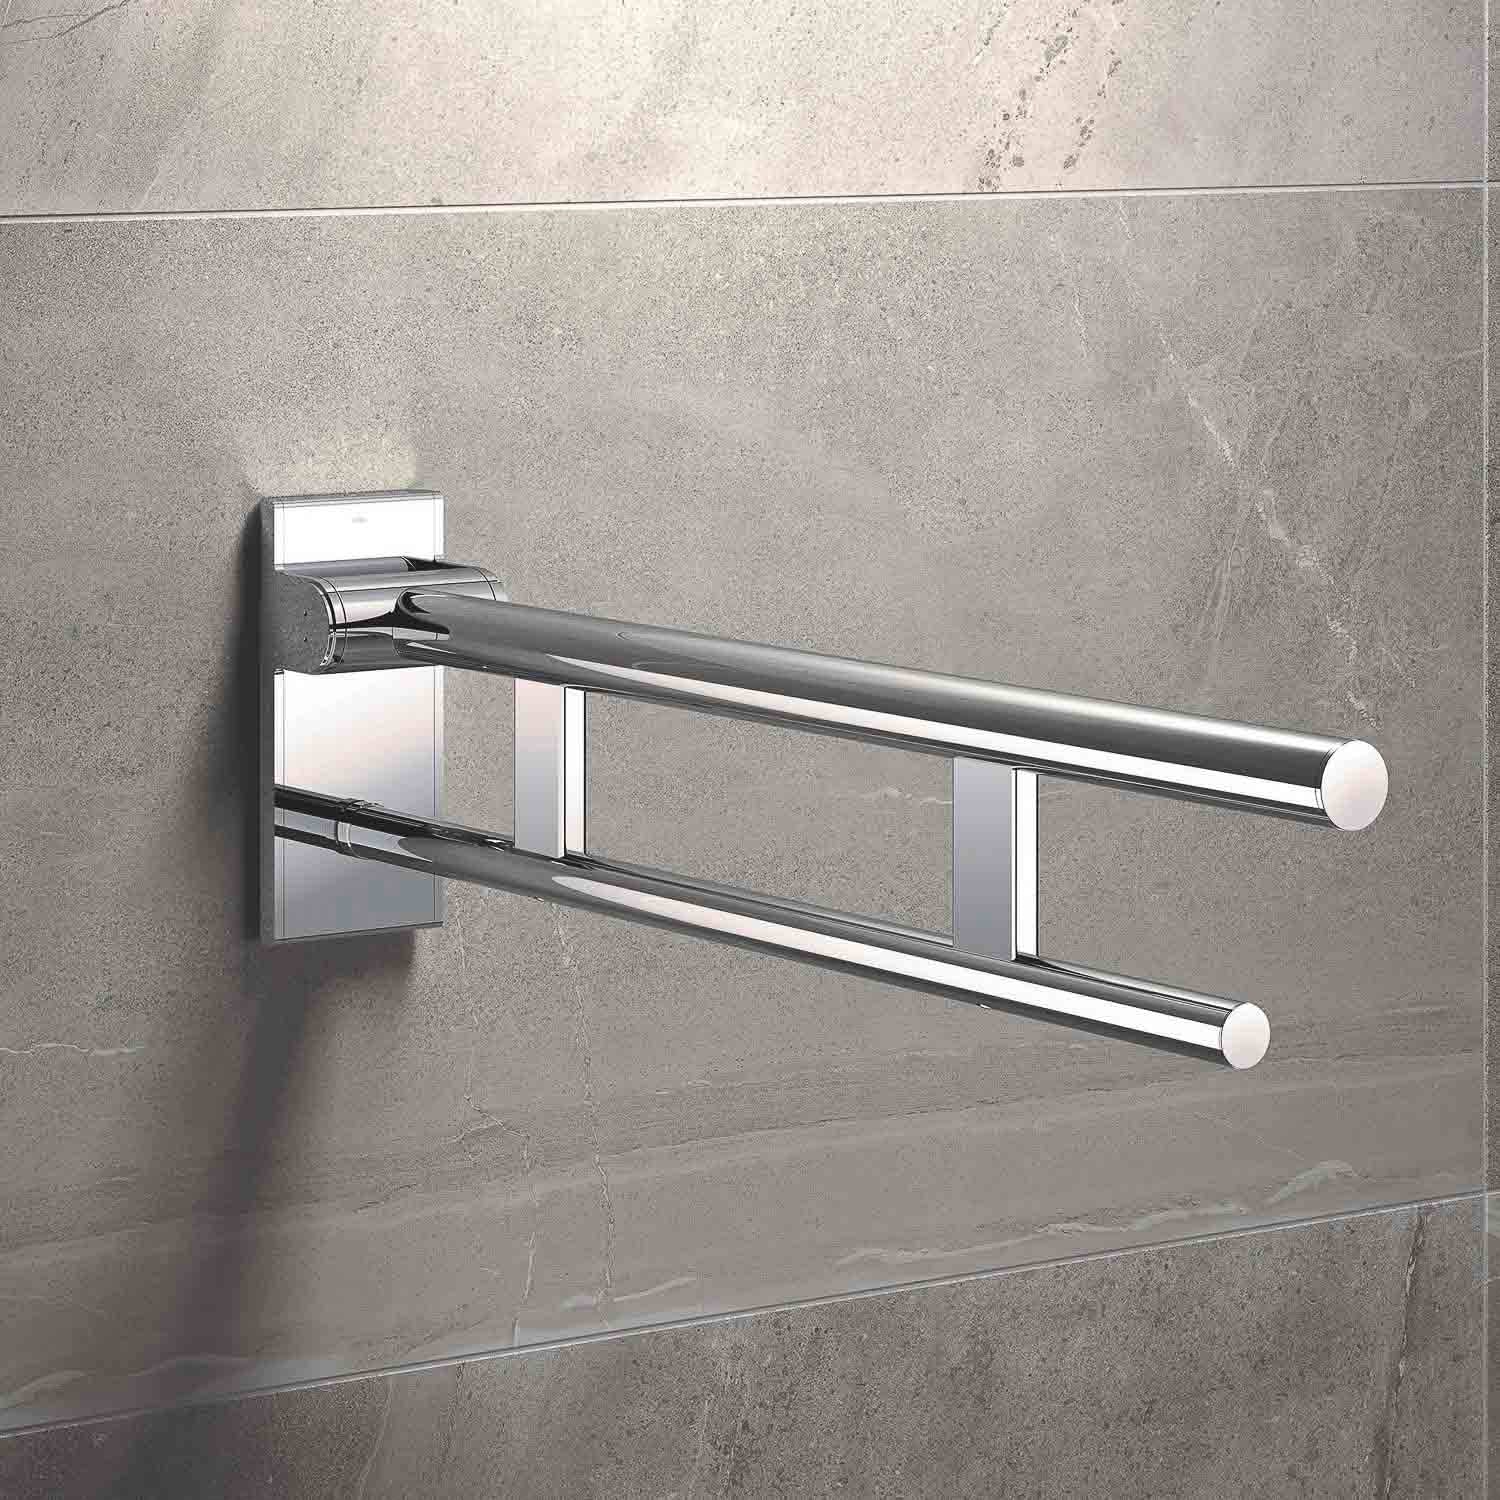 600mm Freestyle Hinged Grab Rail with a chrome finish lifestyle image